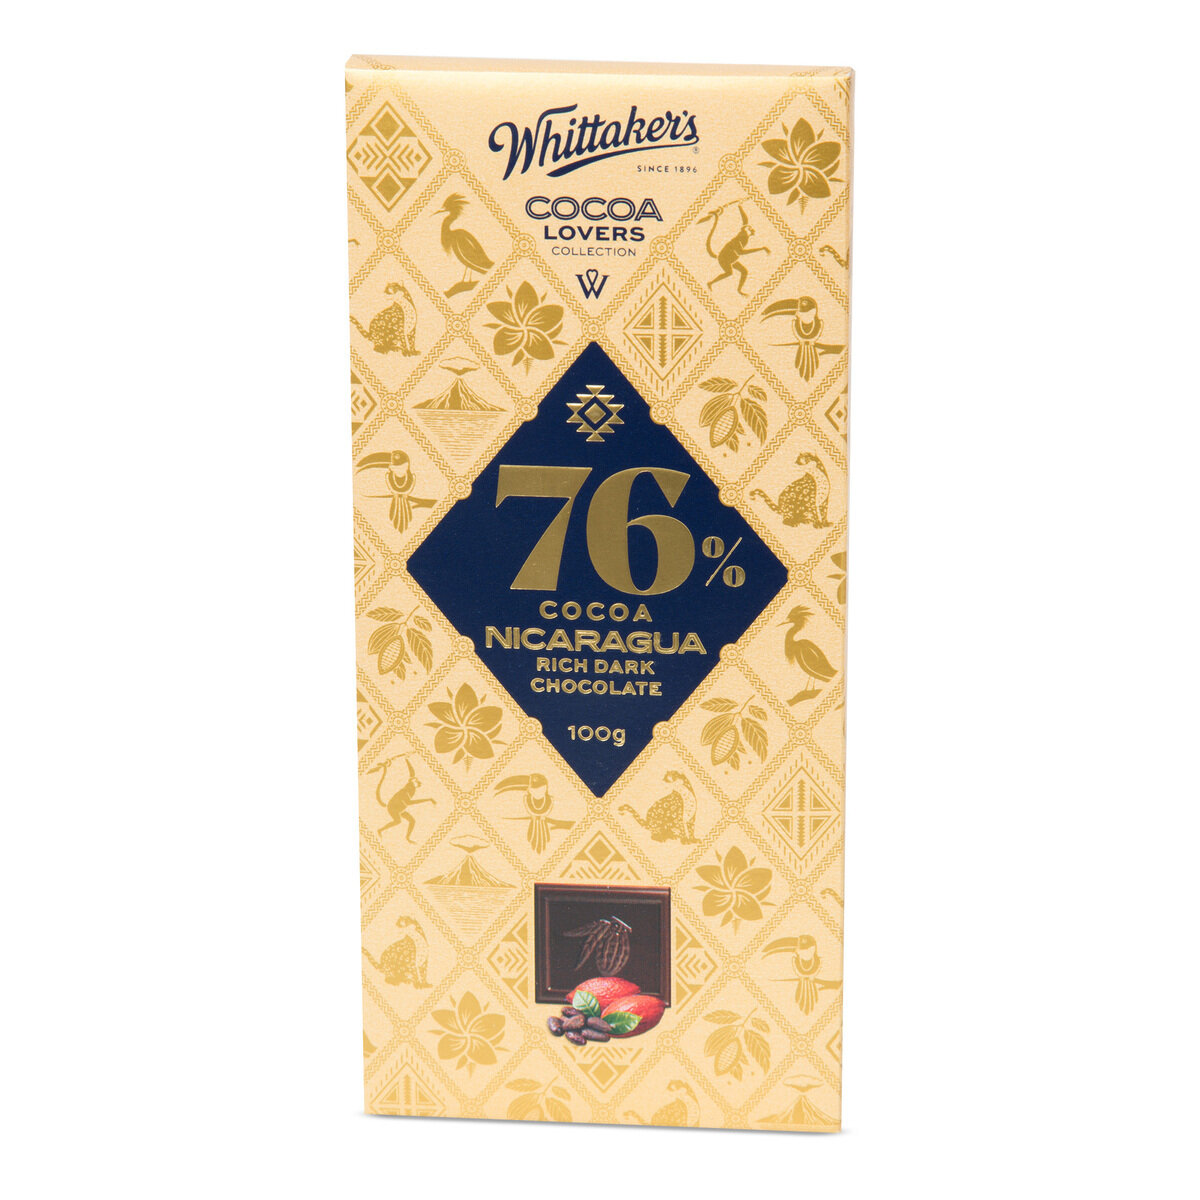 Whittatiers Coca Lover Collection 76% 100G